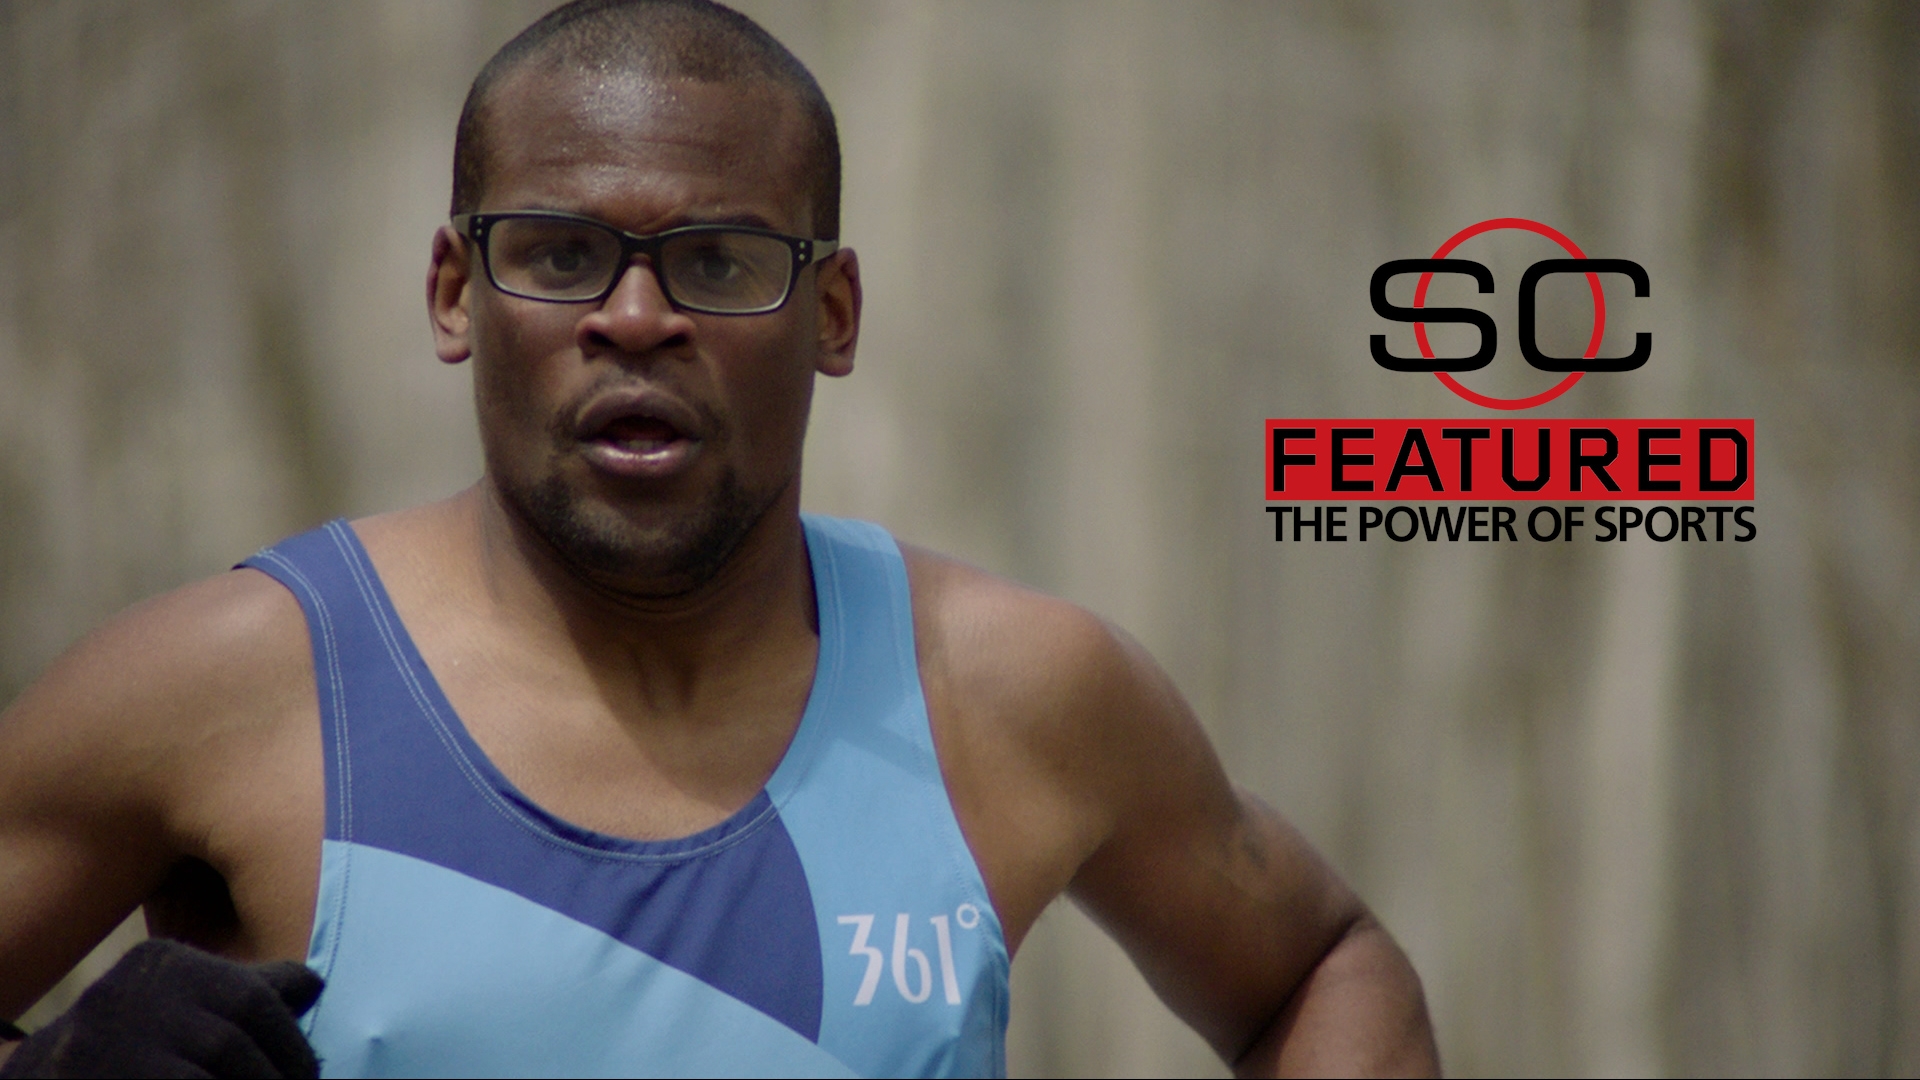 SC Featured: Special Olympics runner deserves your respect